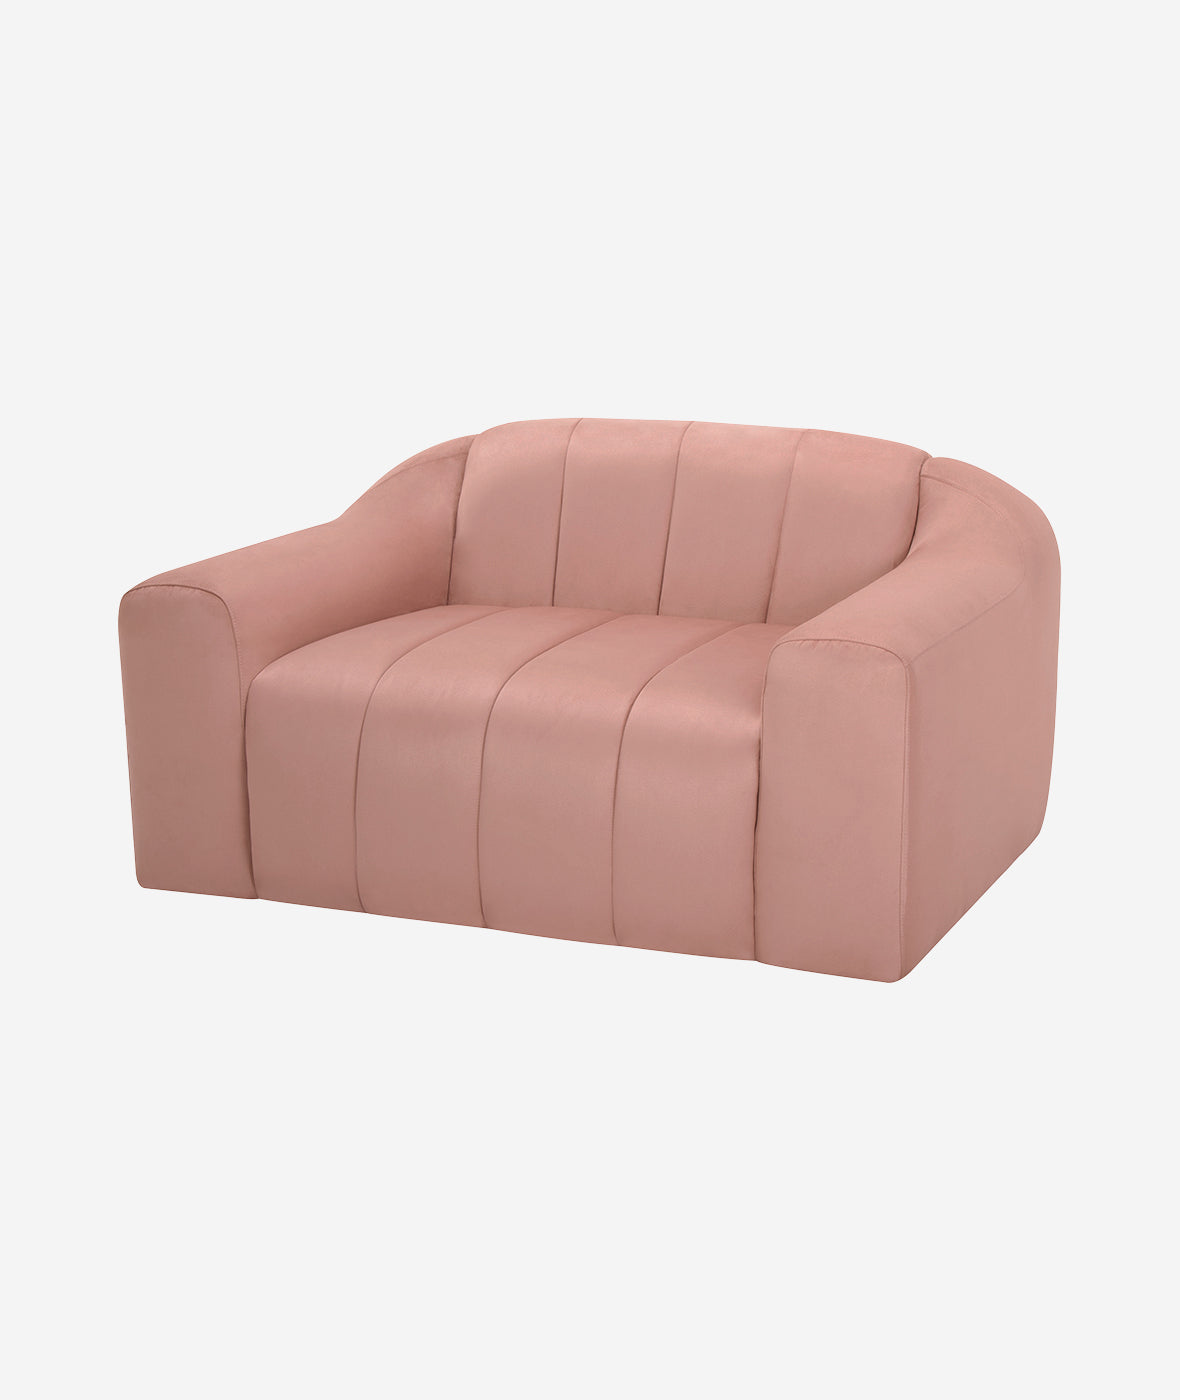 Coraline Occasional Chair - More Options